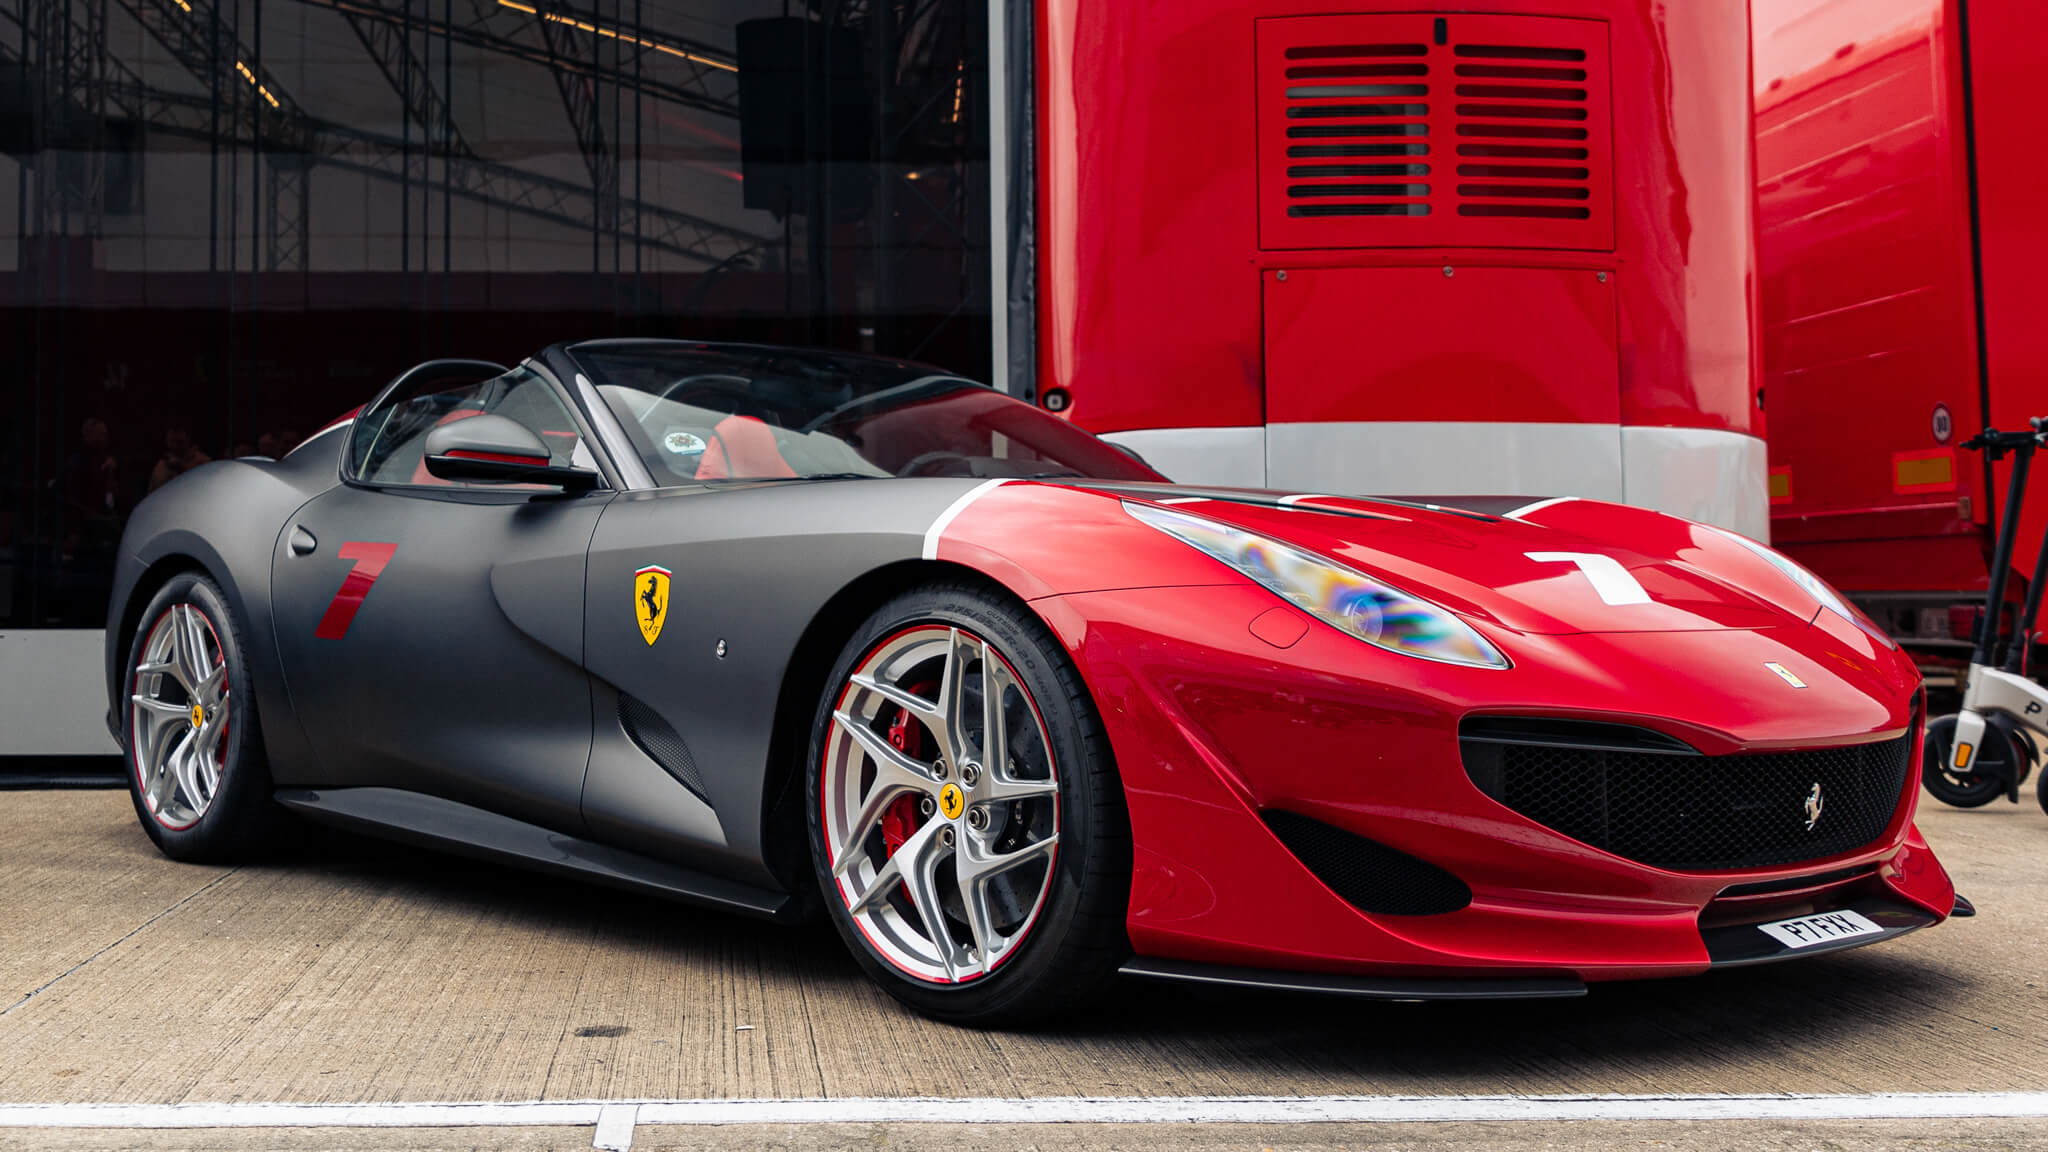 2018 Ferrari SP3JC black and red front